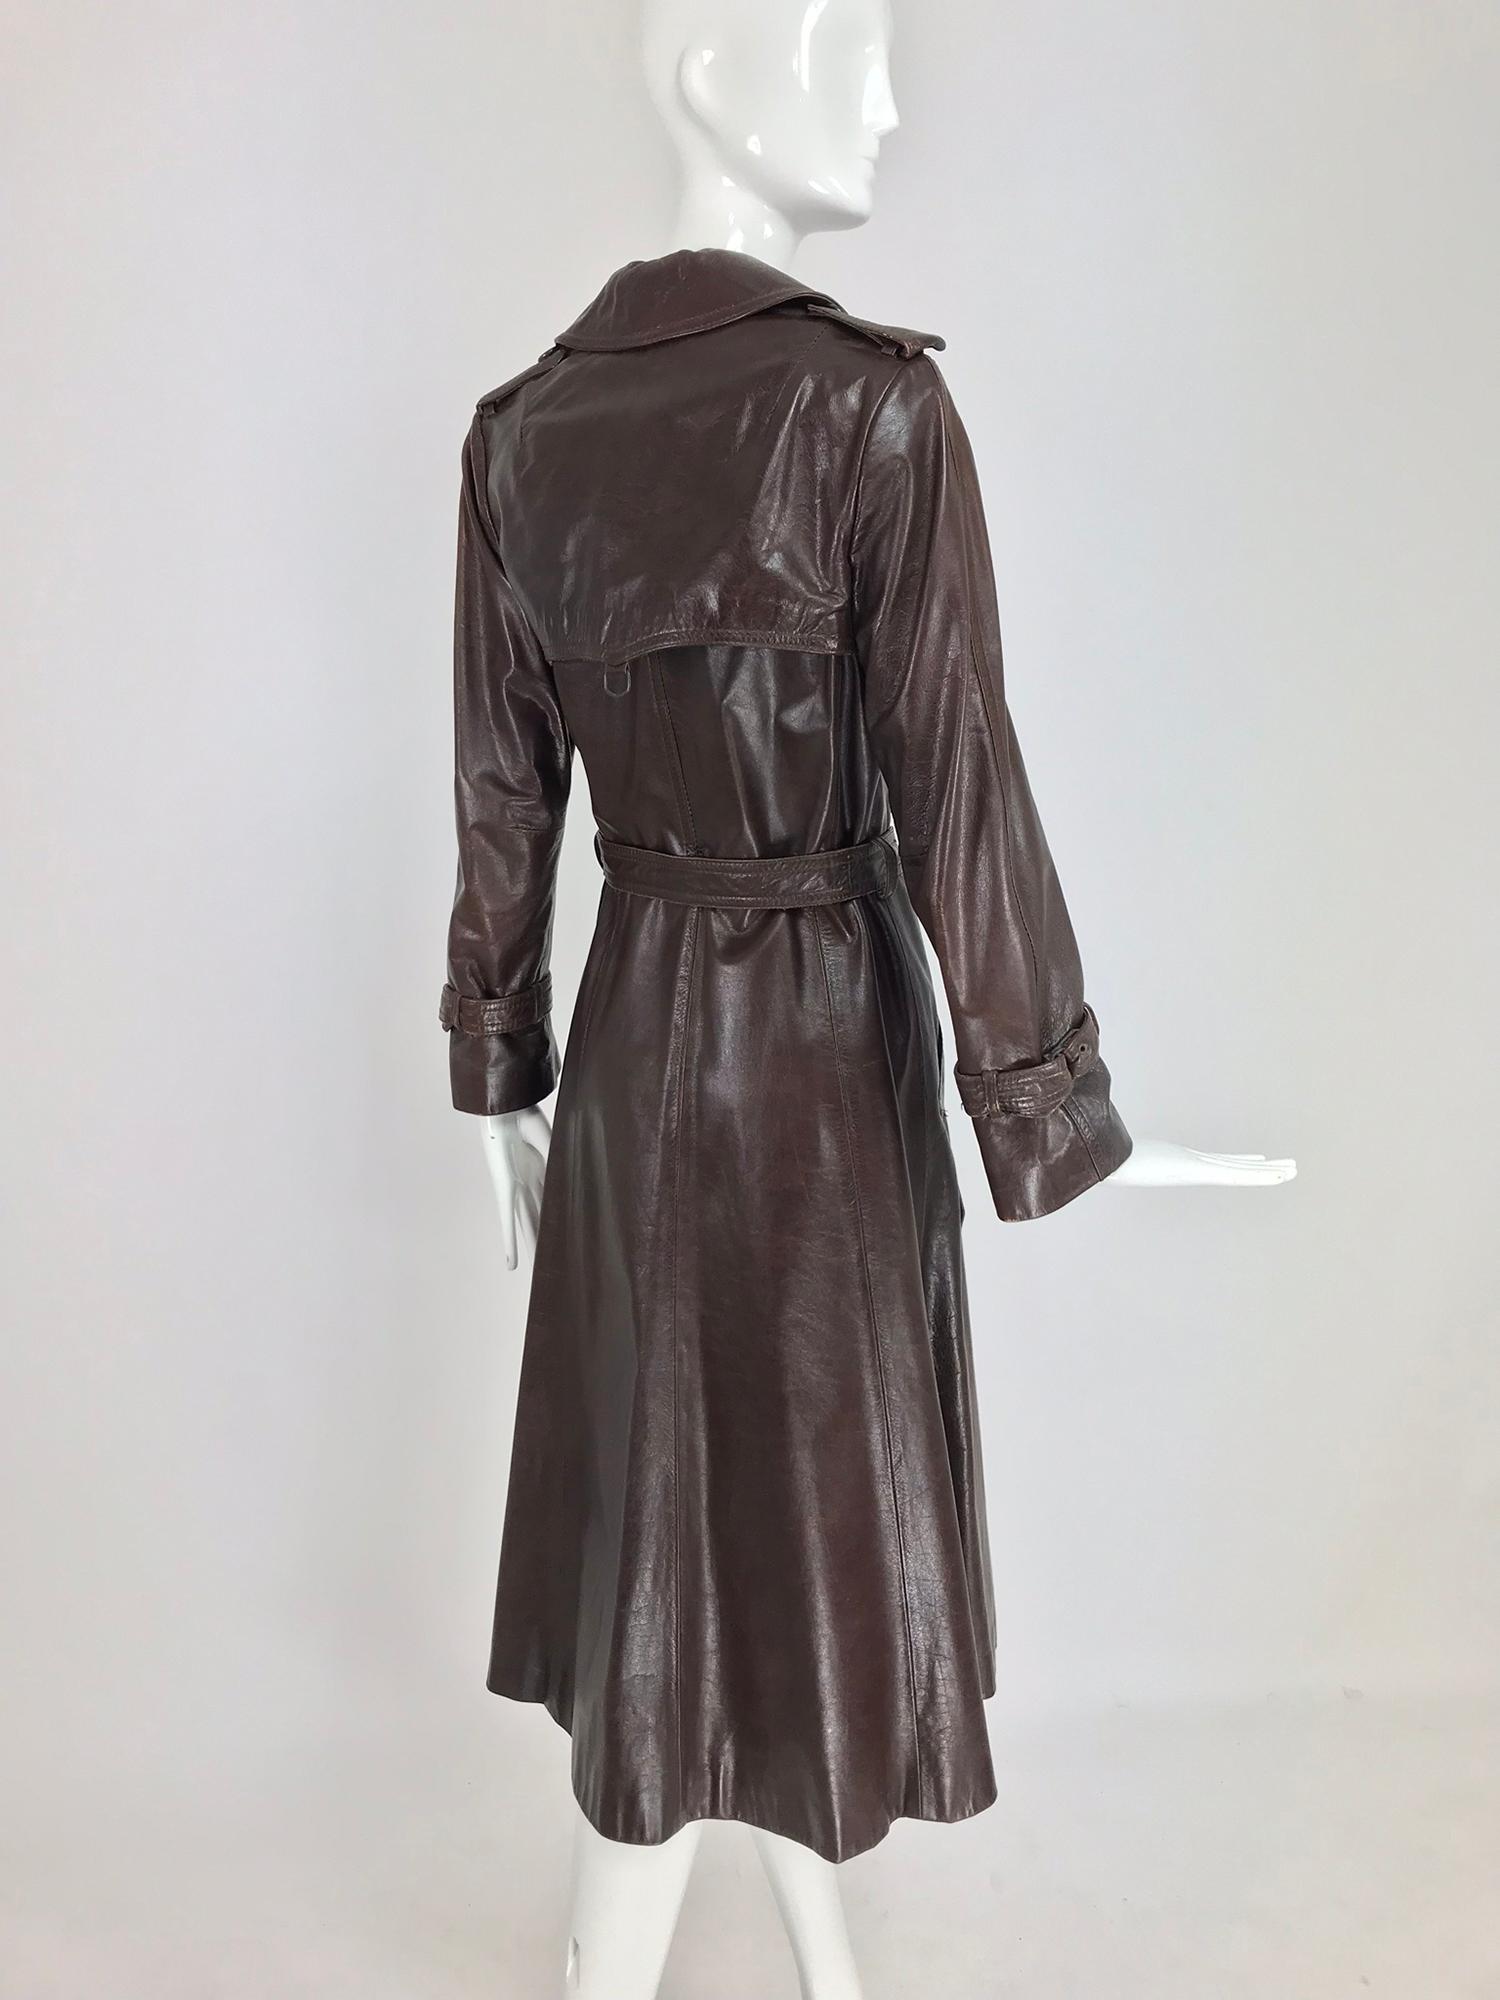 Anne Klein Chocolate brown leather trench coat 1970s 2